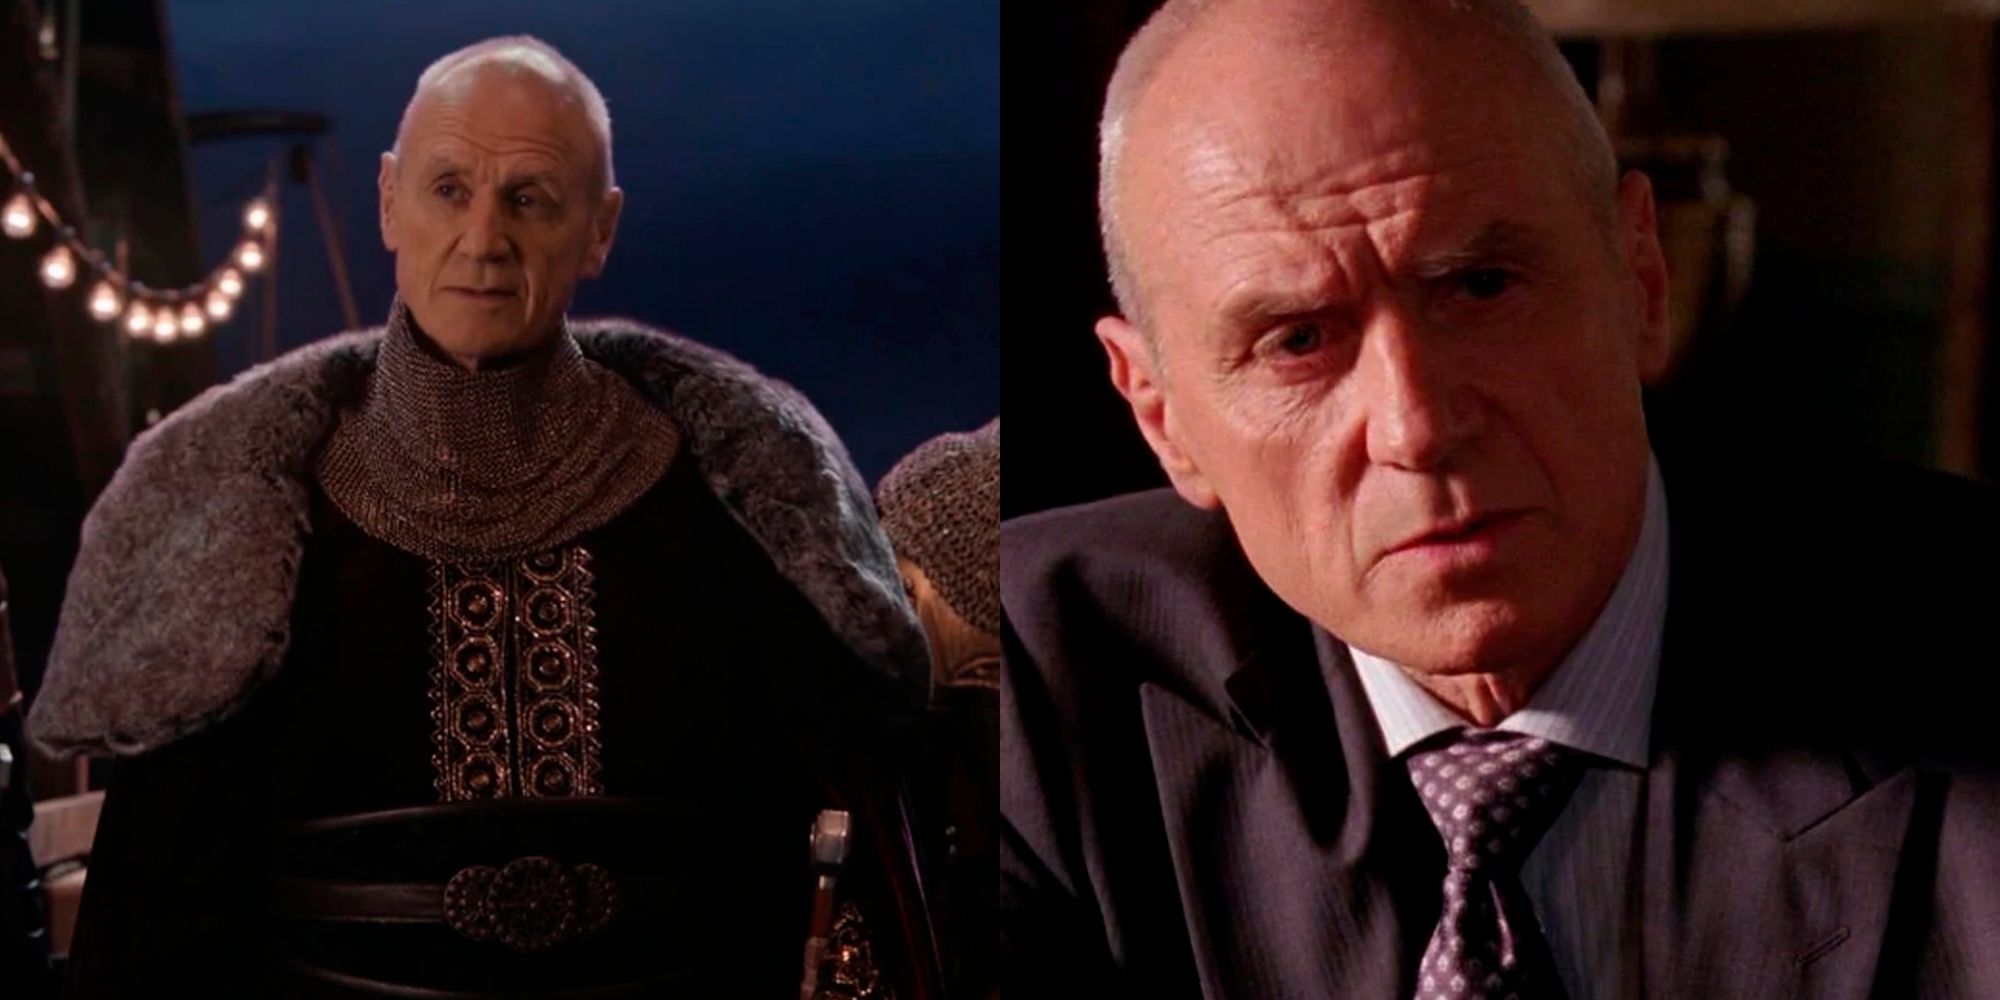 Alan Dale plays King George and Charles Widmore in Once Upon a Time and Lost